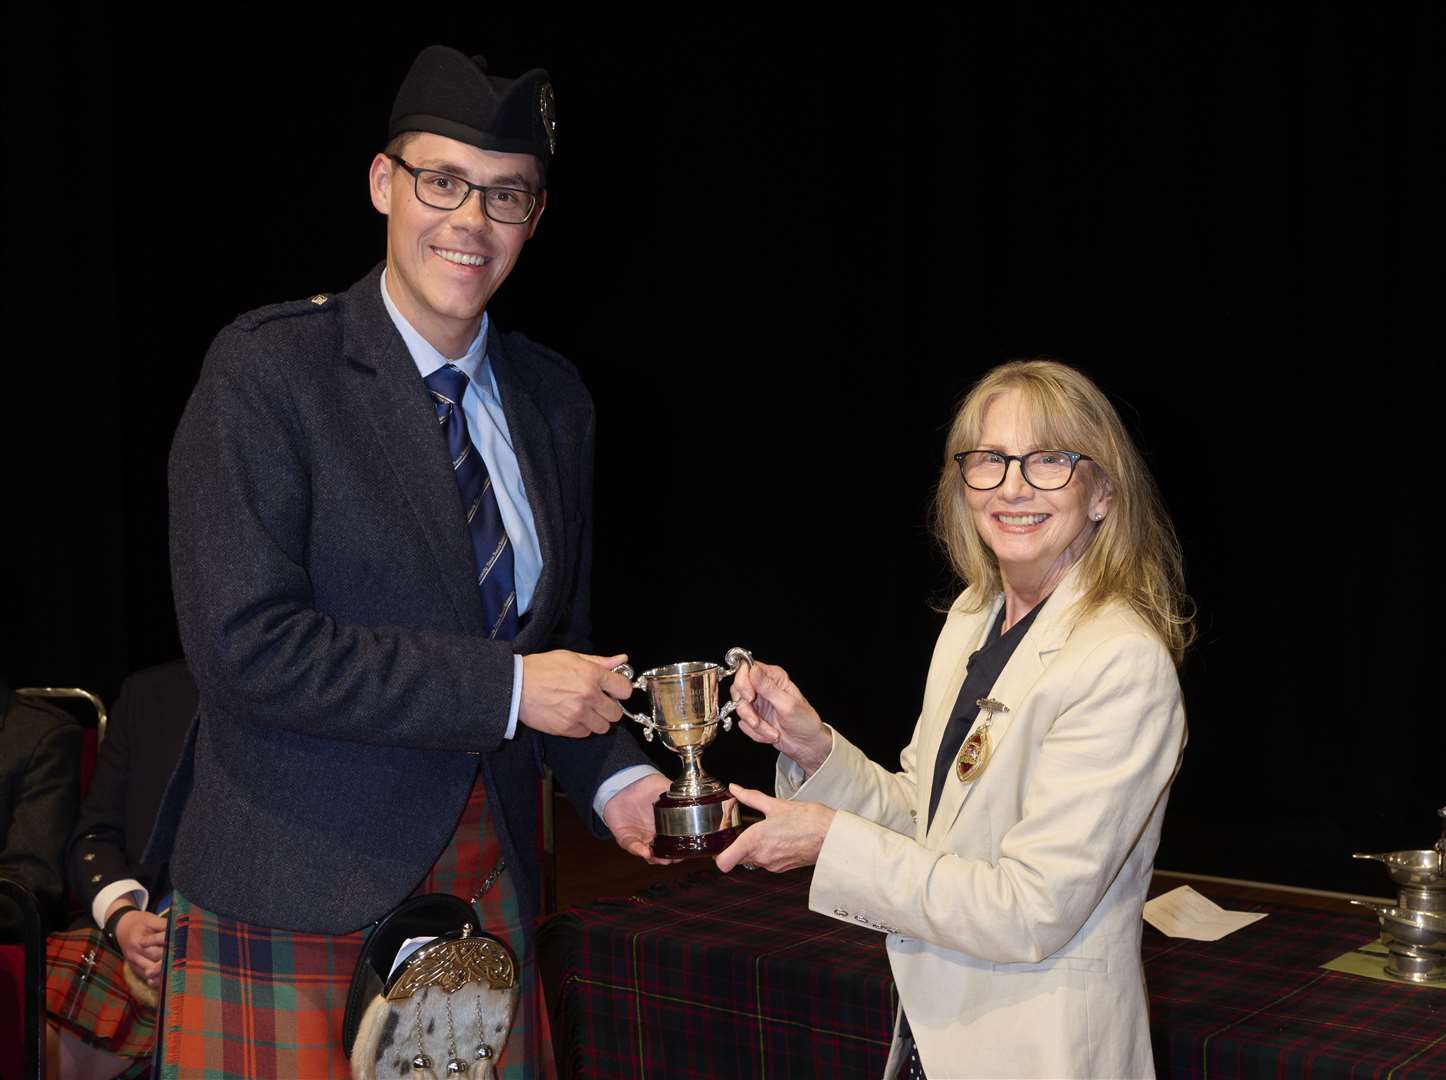 Glynis Campbell-Sinclair (the Provost of Inverness) with Zephan Knichel who won the 1st Hornpipe and Jig B at the Northern Meeting 2022 which was held at Eden Court in Inverness.